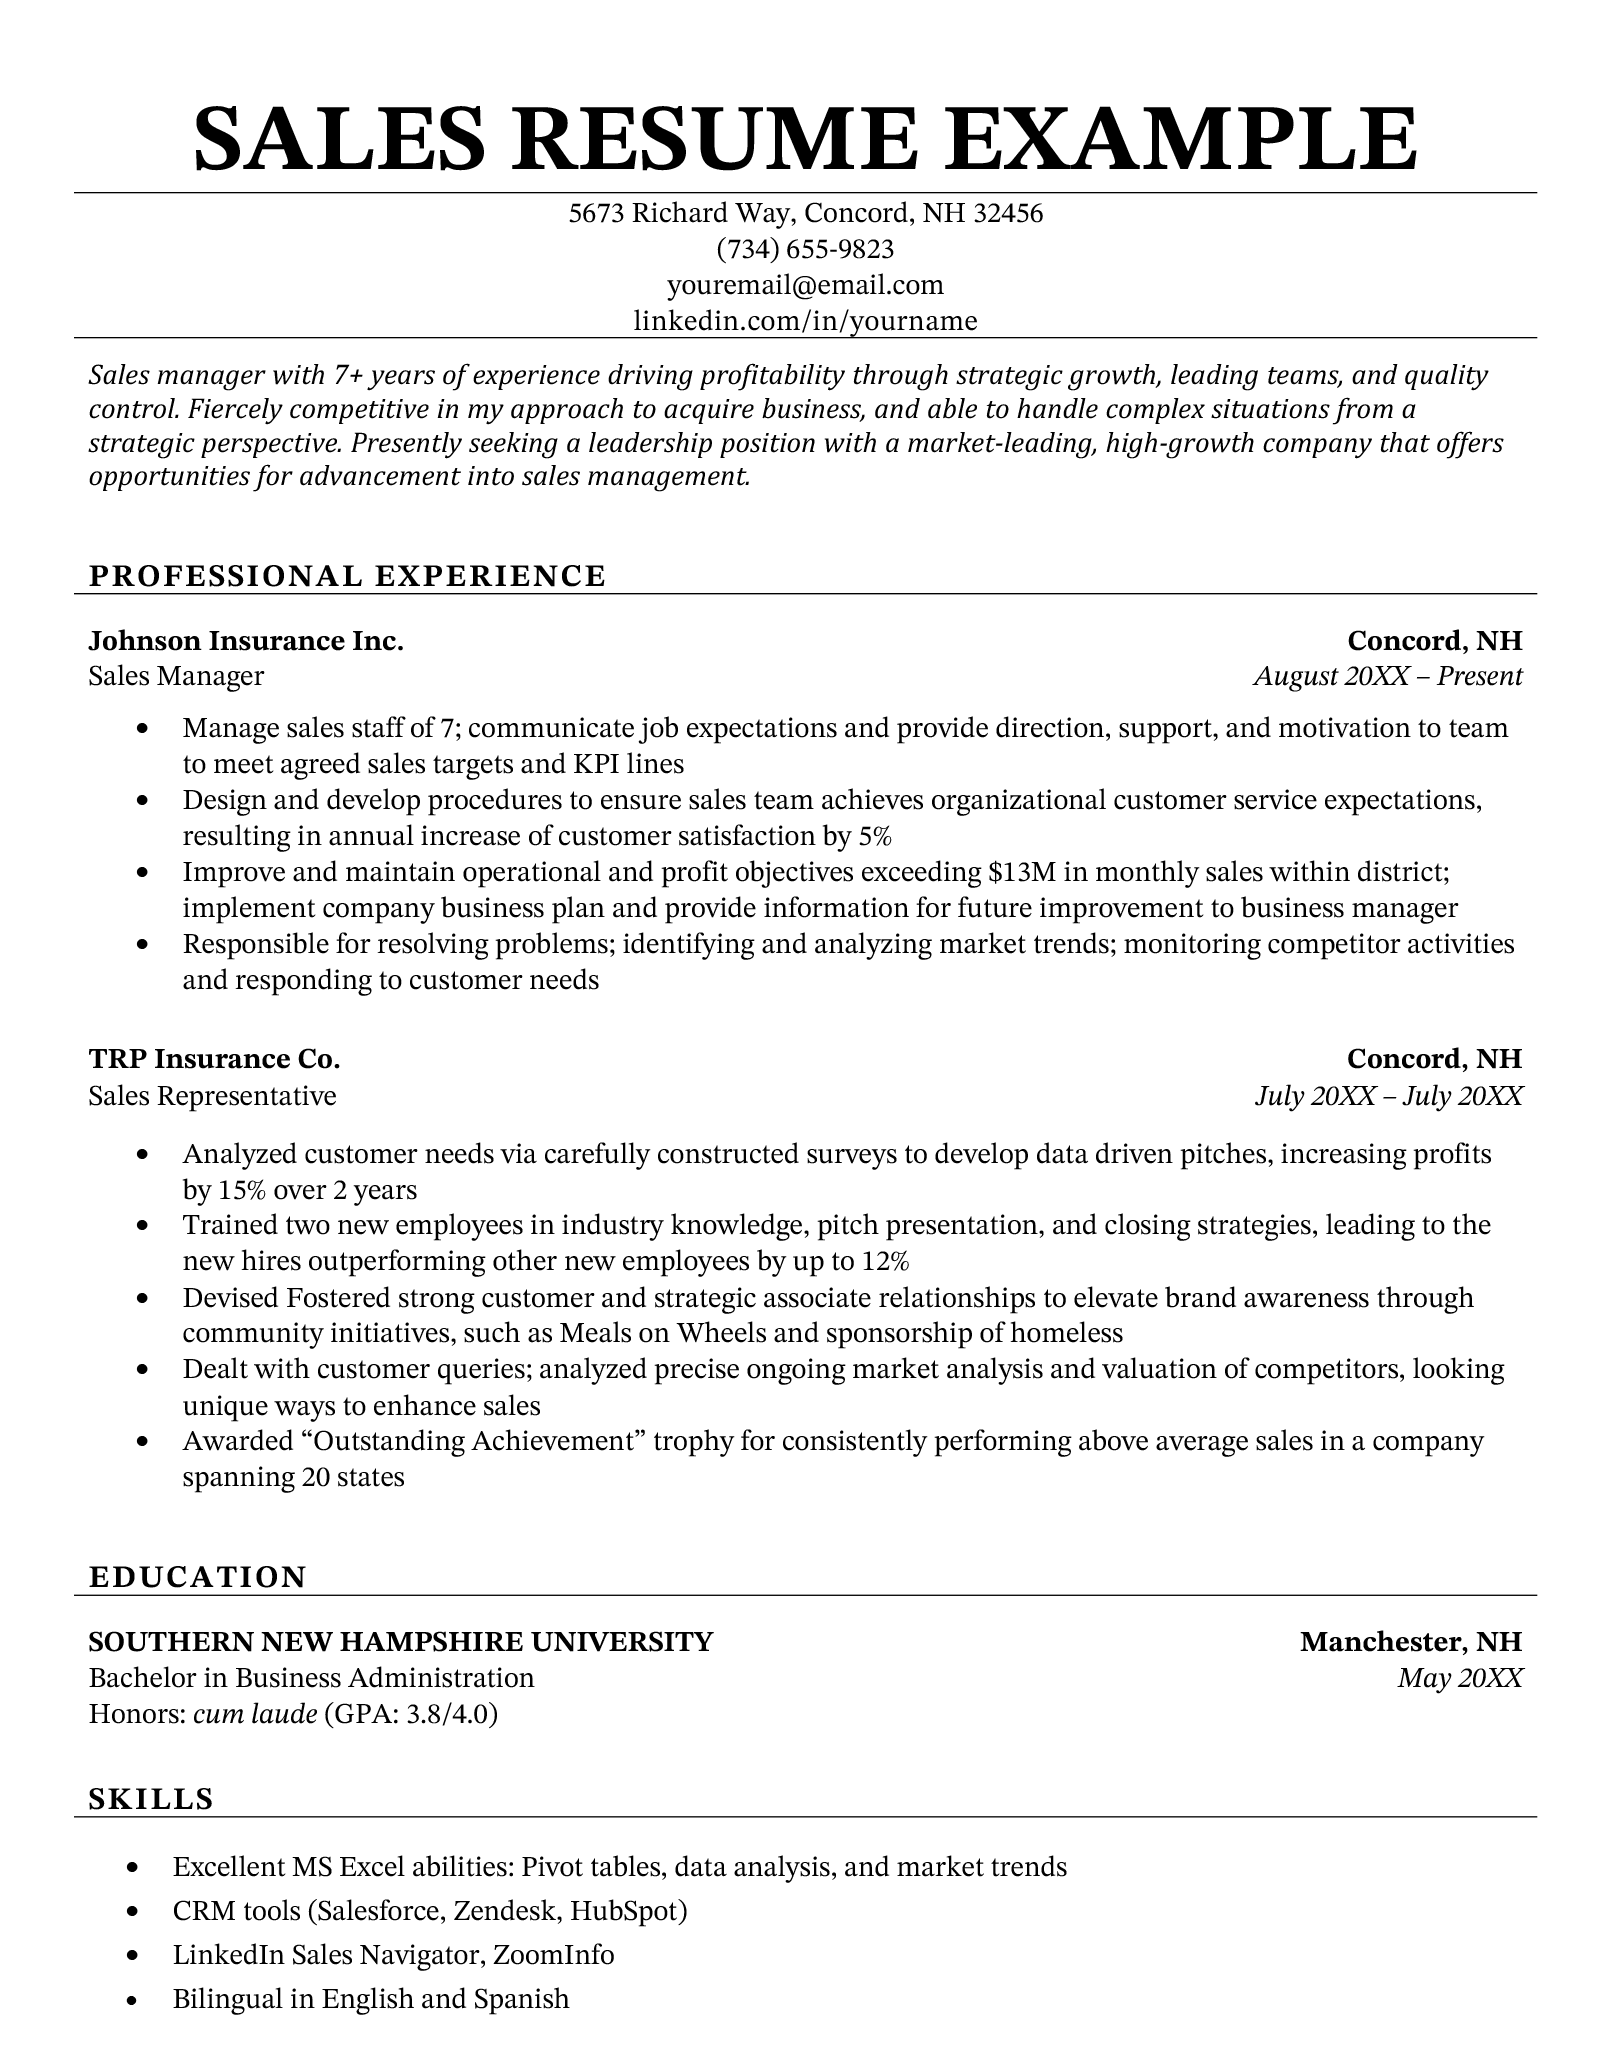 An example of a sales resume